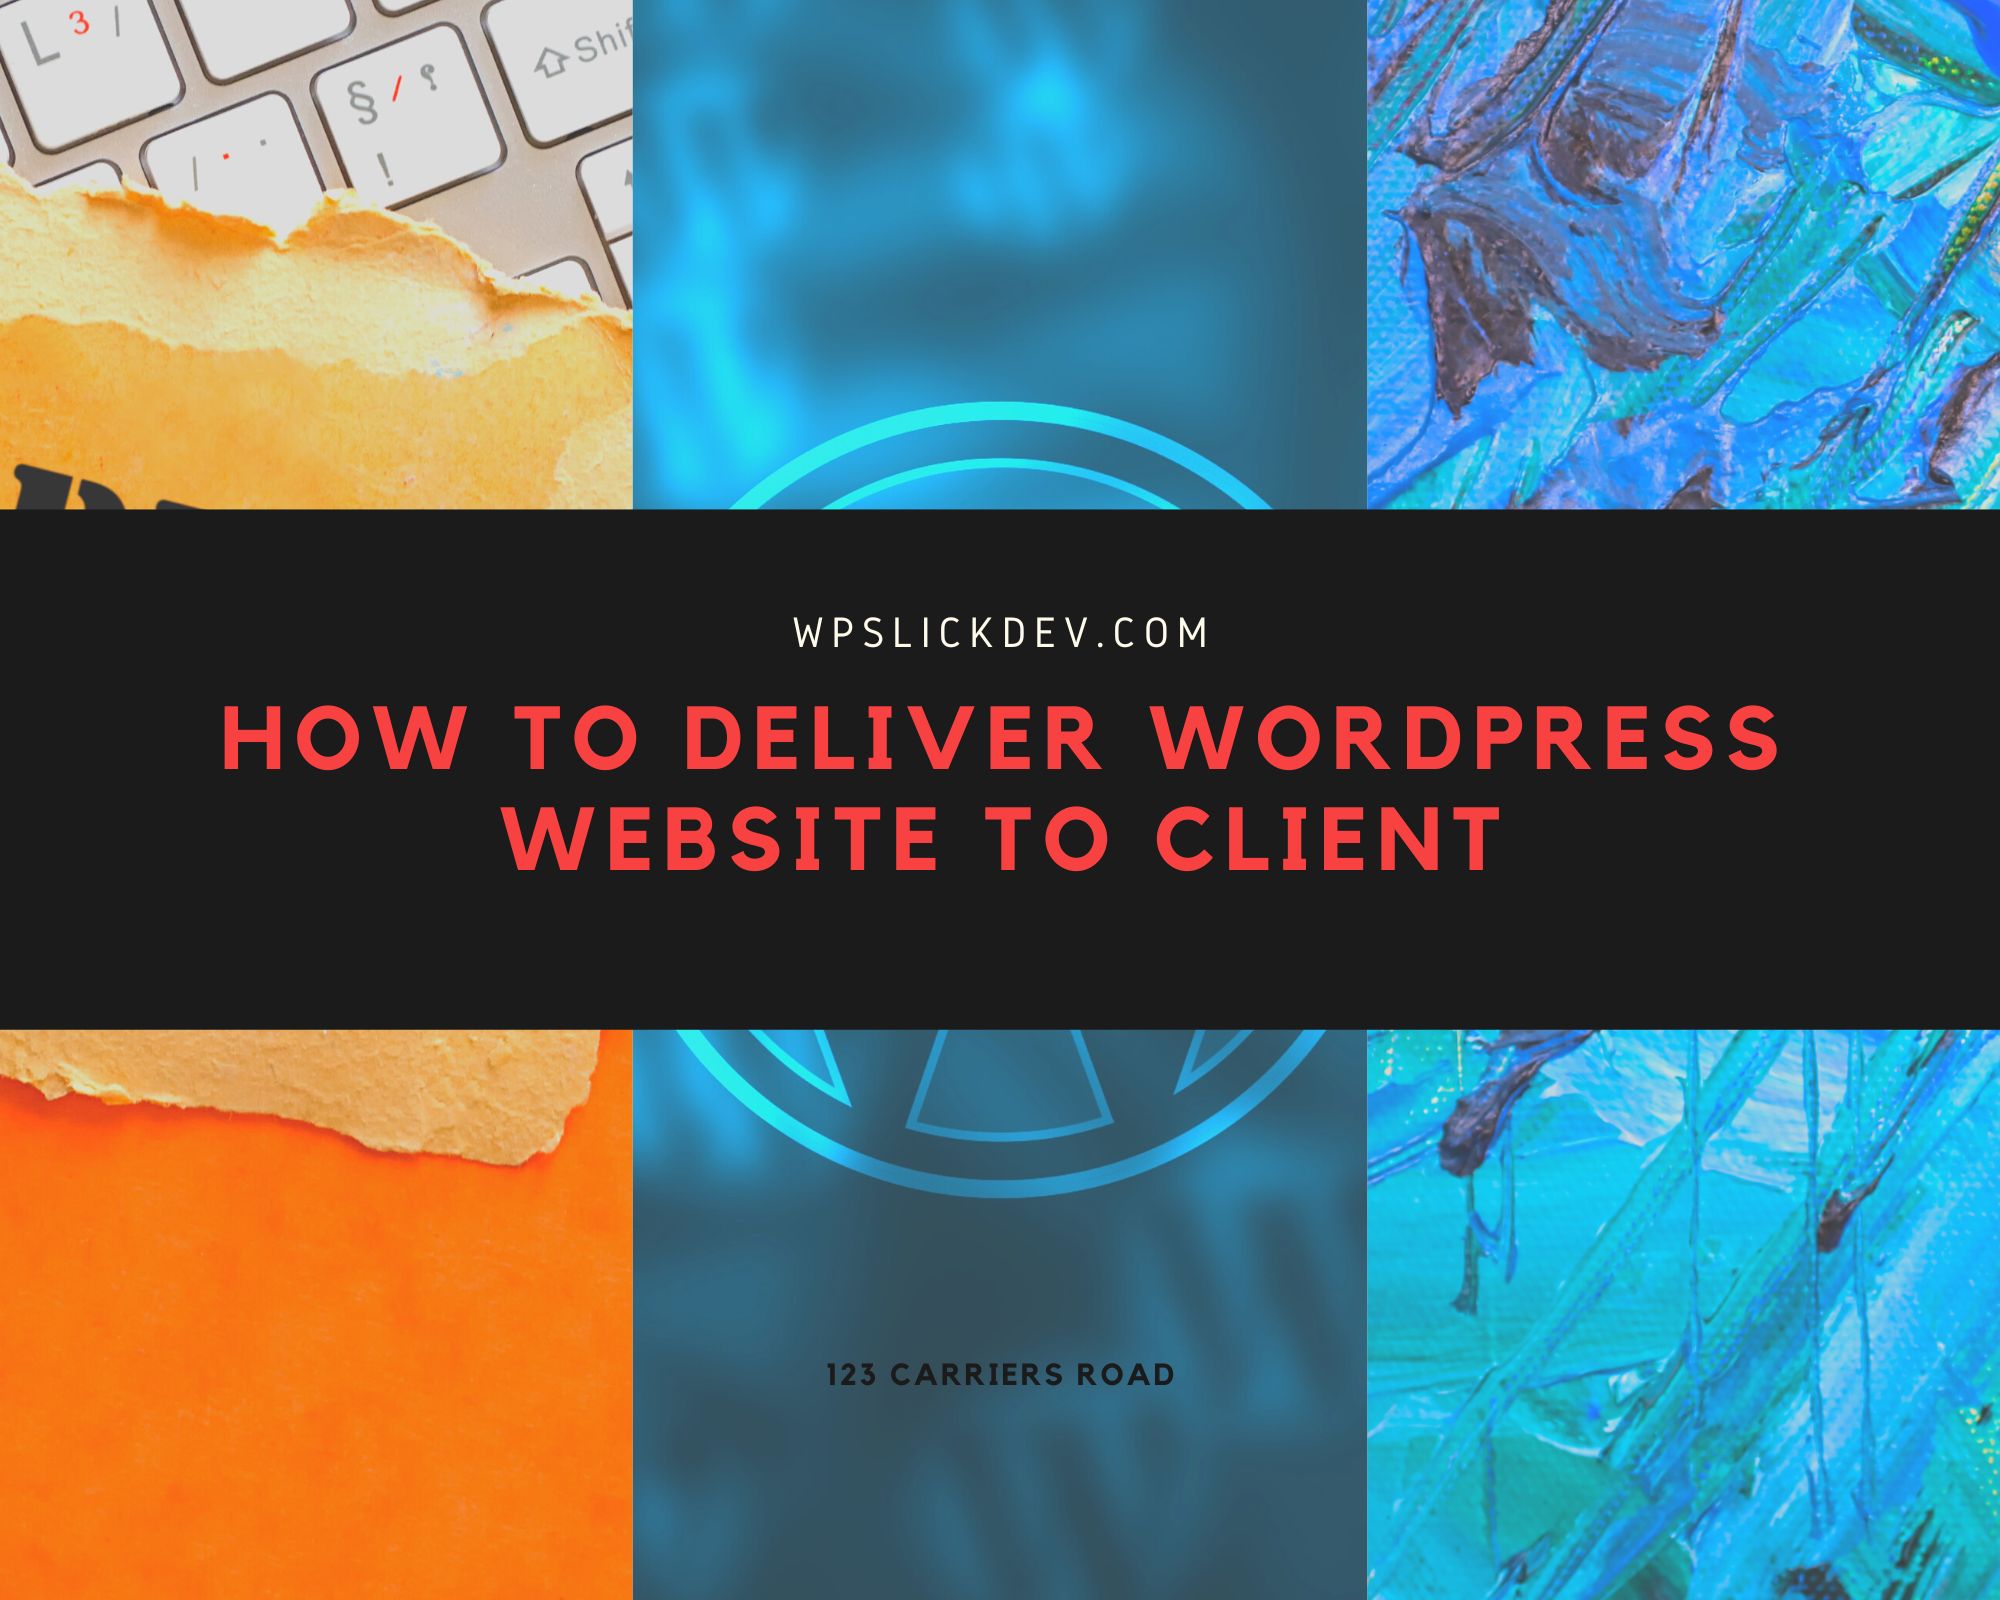 How to deliver wordpress website to client